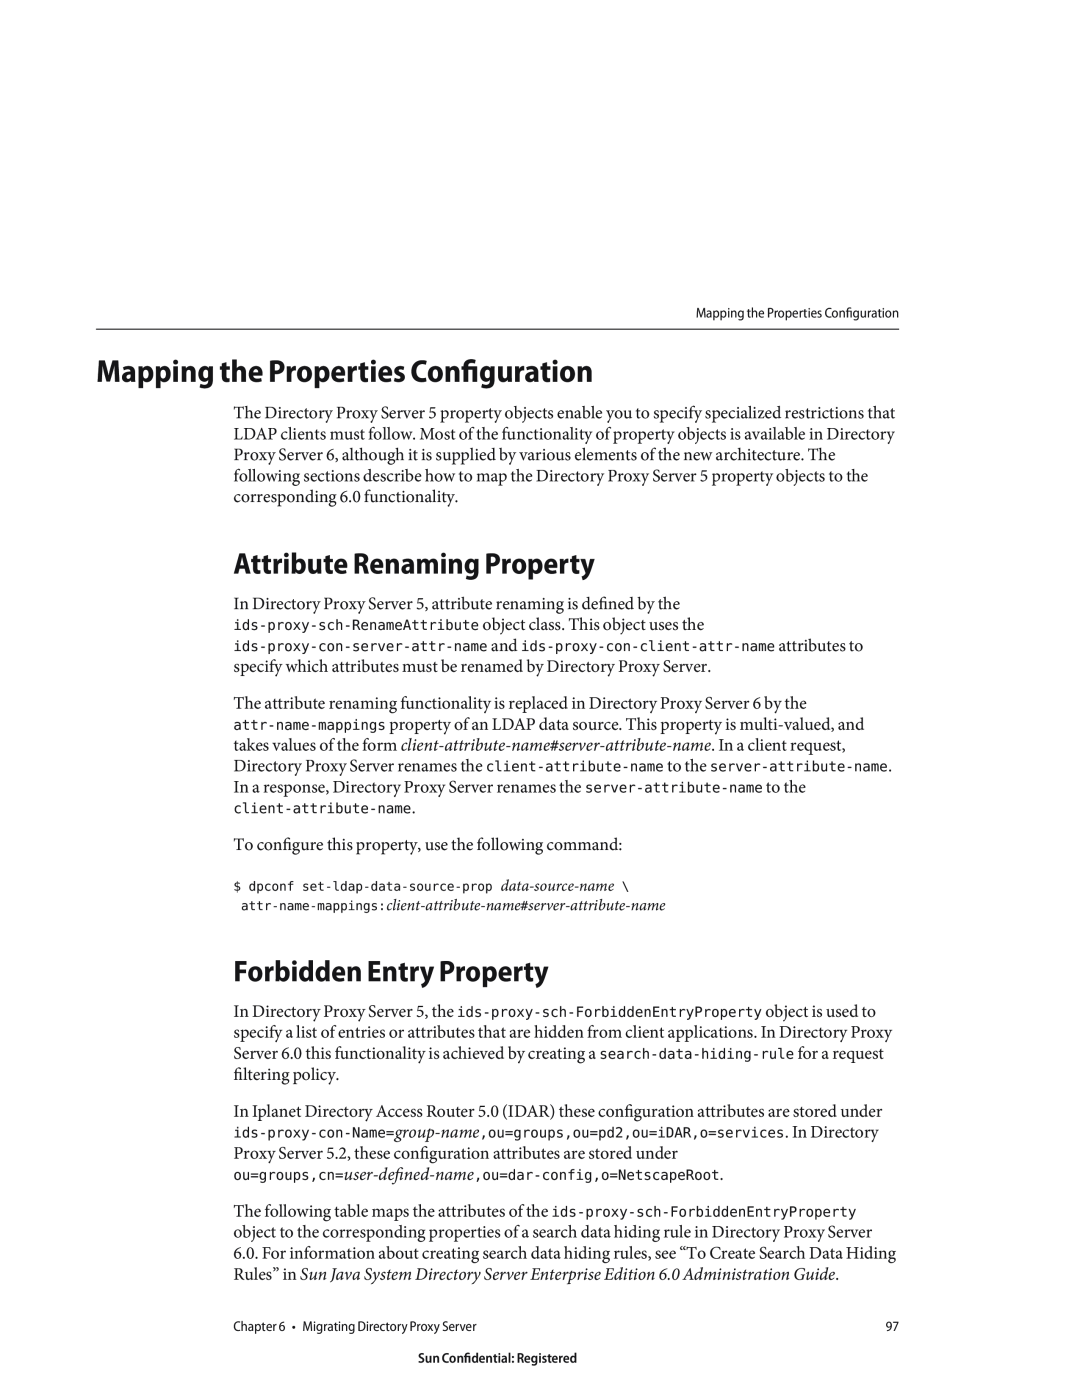 Sun Microsystems 8190994 manual Mapping the Properties Configuration, Attribute Renaming Property, Forbidden Entry Property 